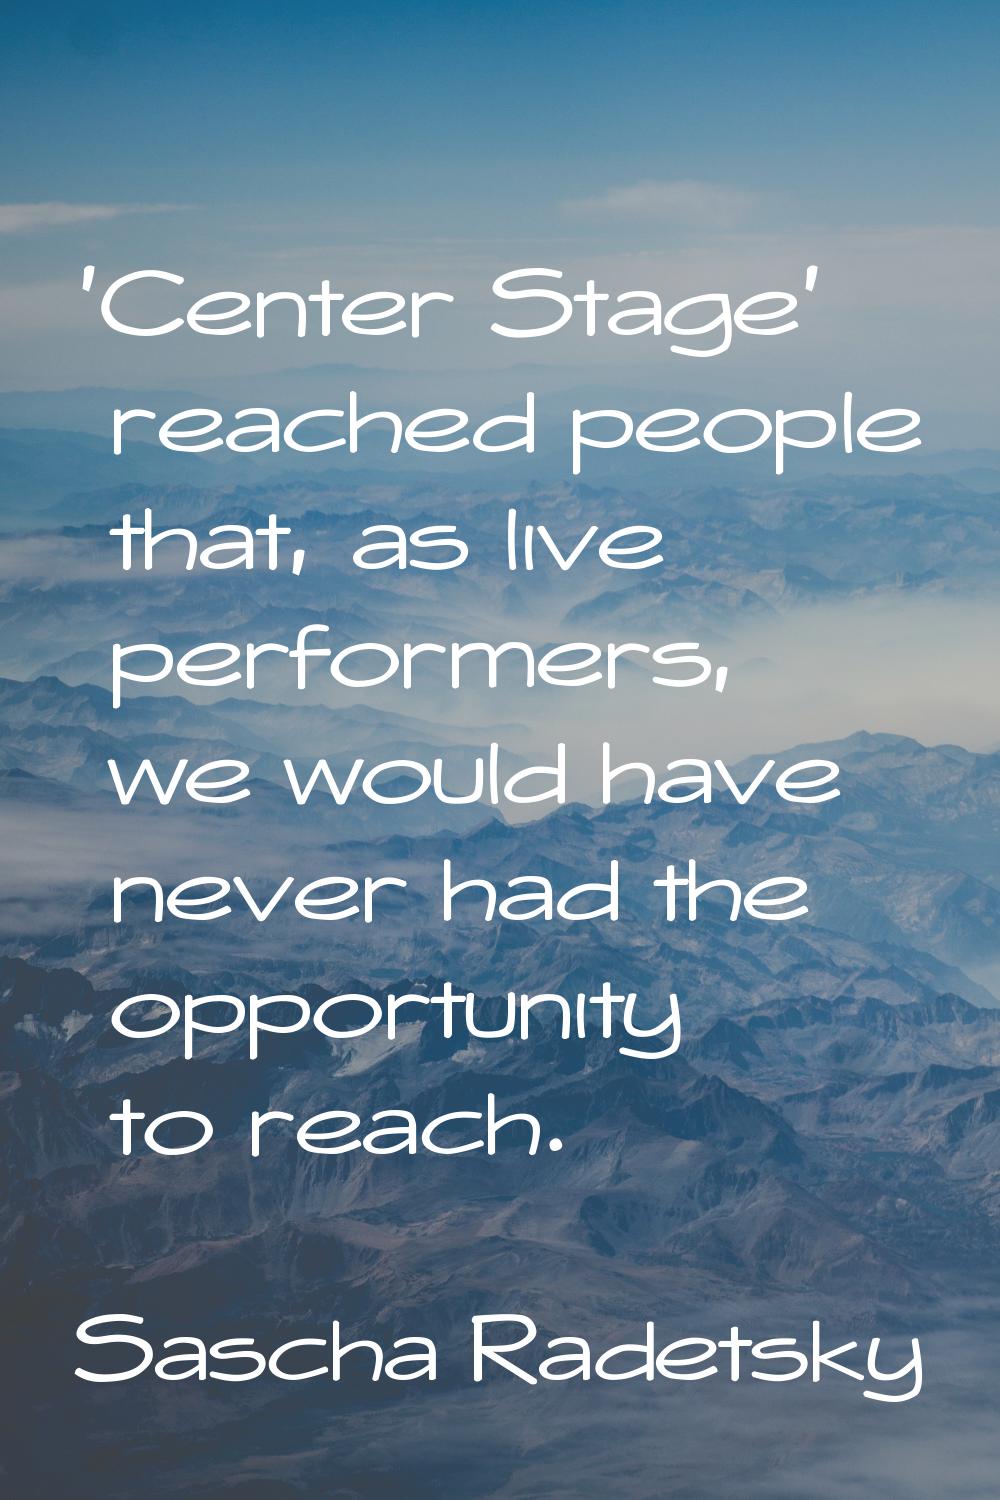 'Center Stage' reached people that, as live performers, we would have never had the opportunity to 